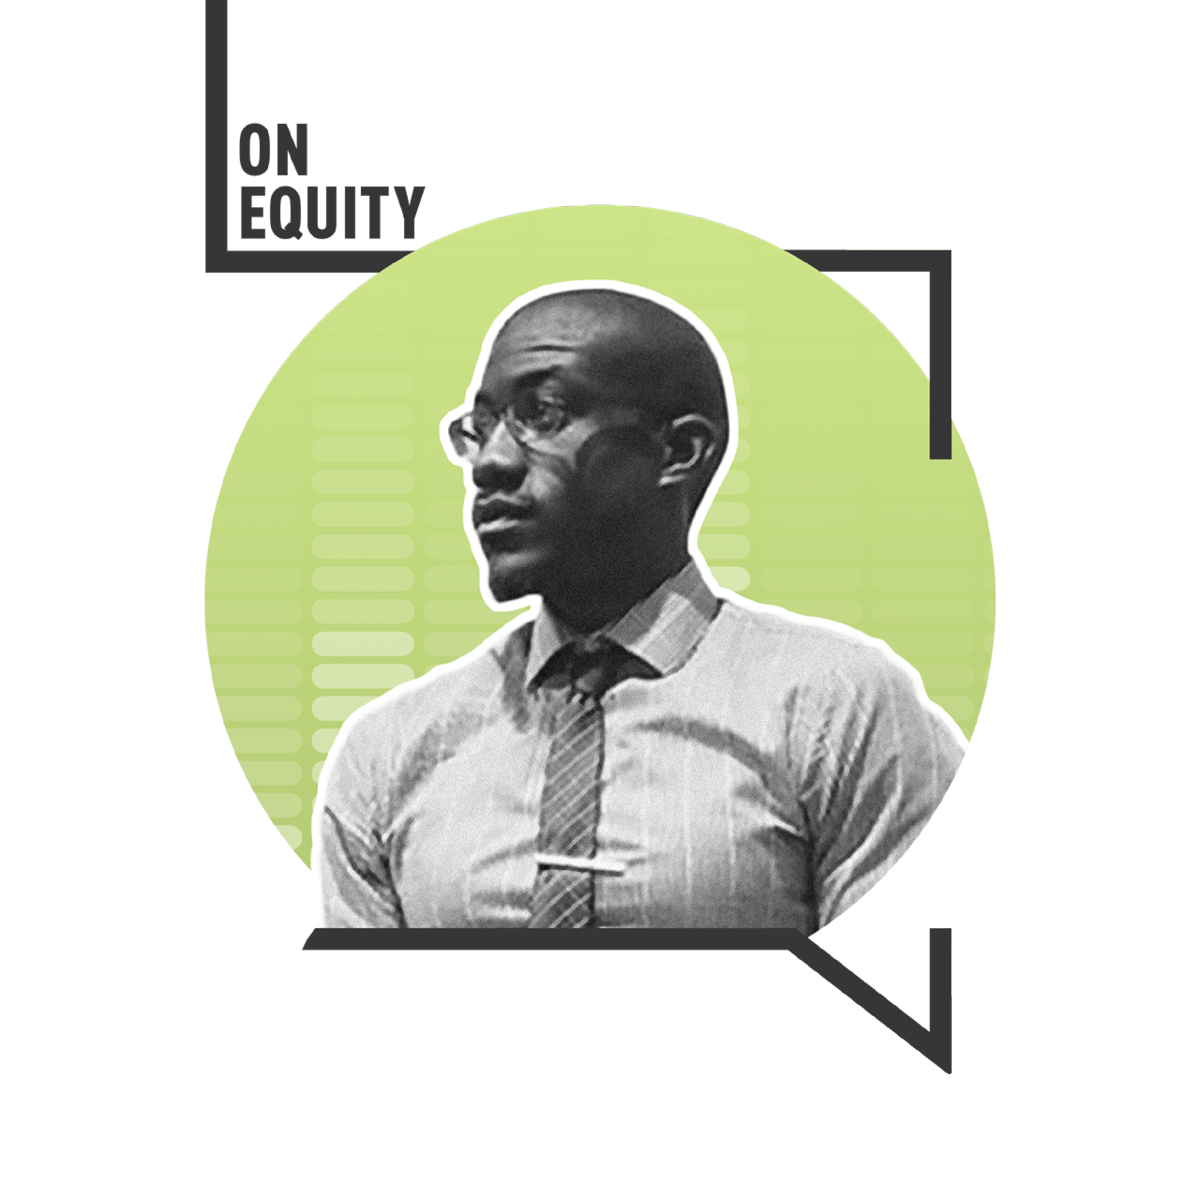 A black and white photograph of Chuka Ejeckam in front of a lime green circle inside the black outline of a speech bubble, with the words “On Equity” in the top left corner.